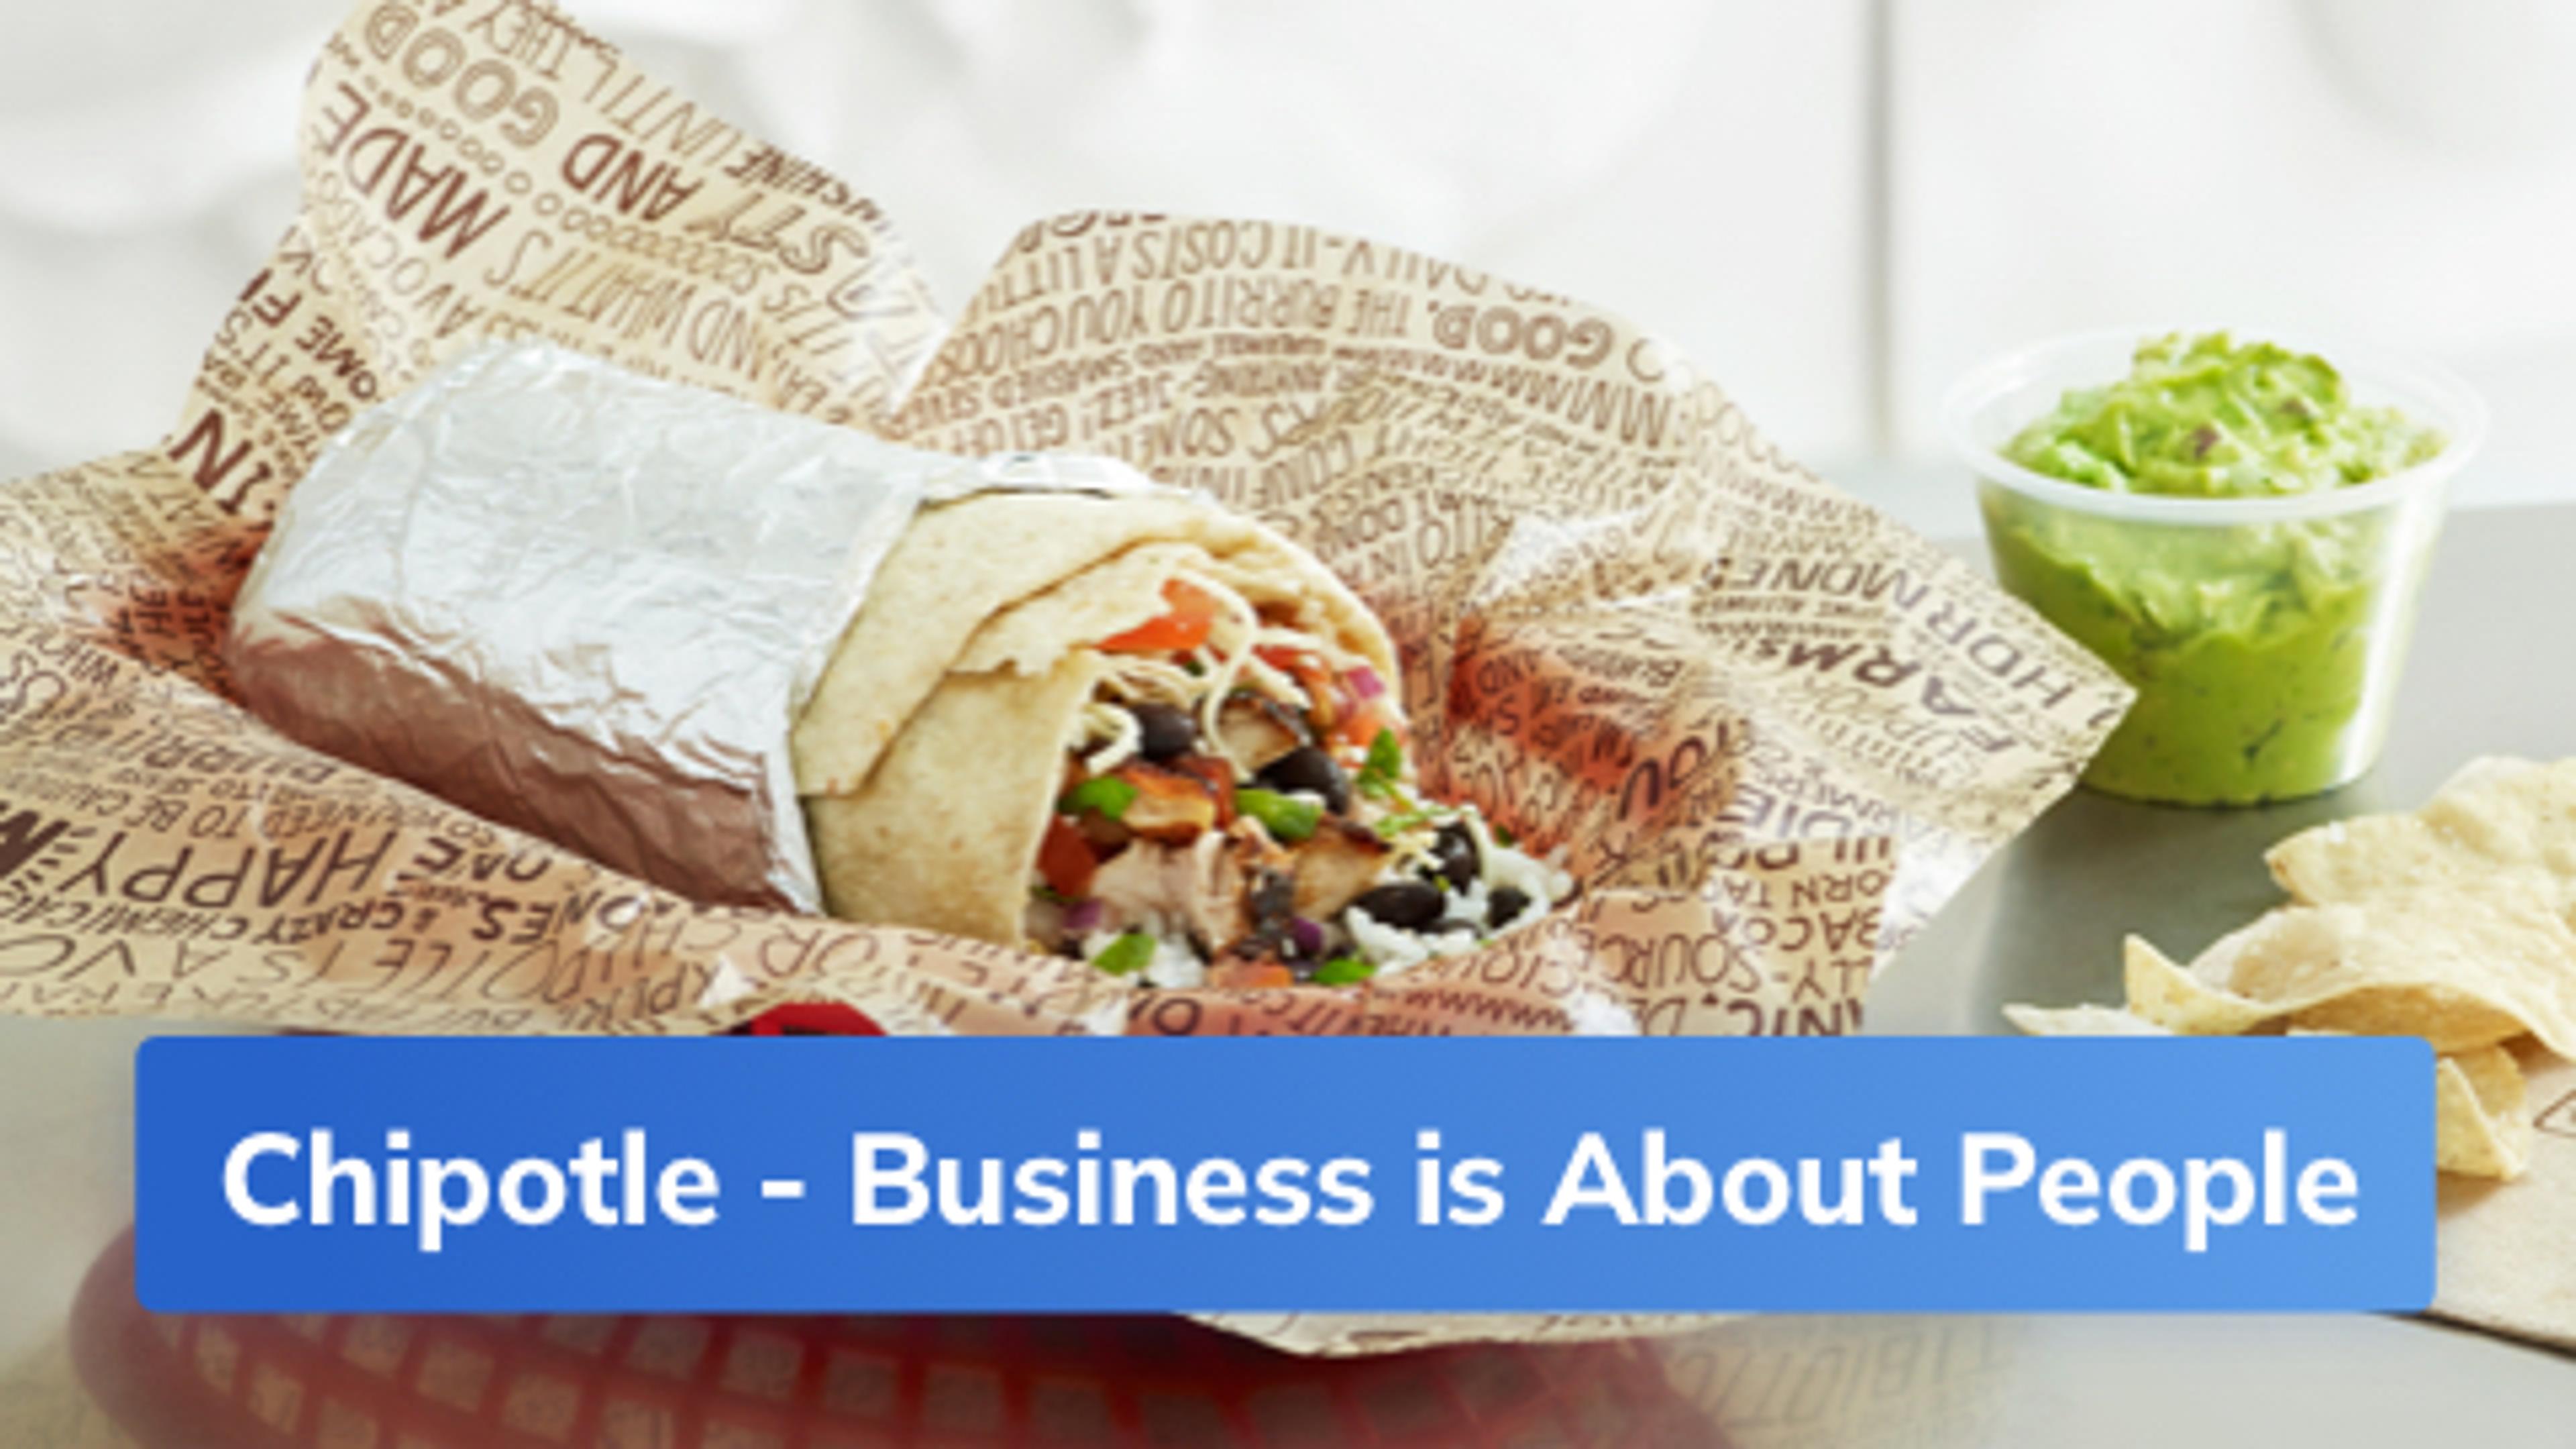 Chipotle - Business is About People